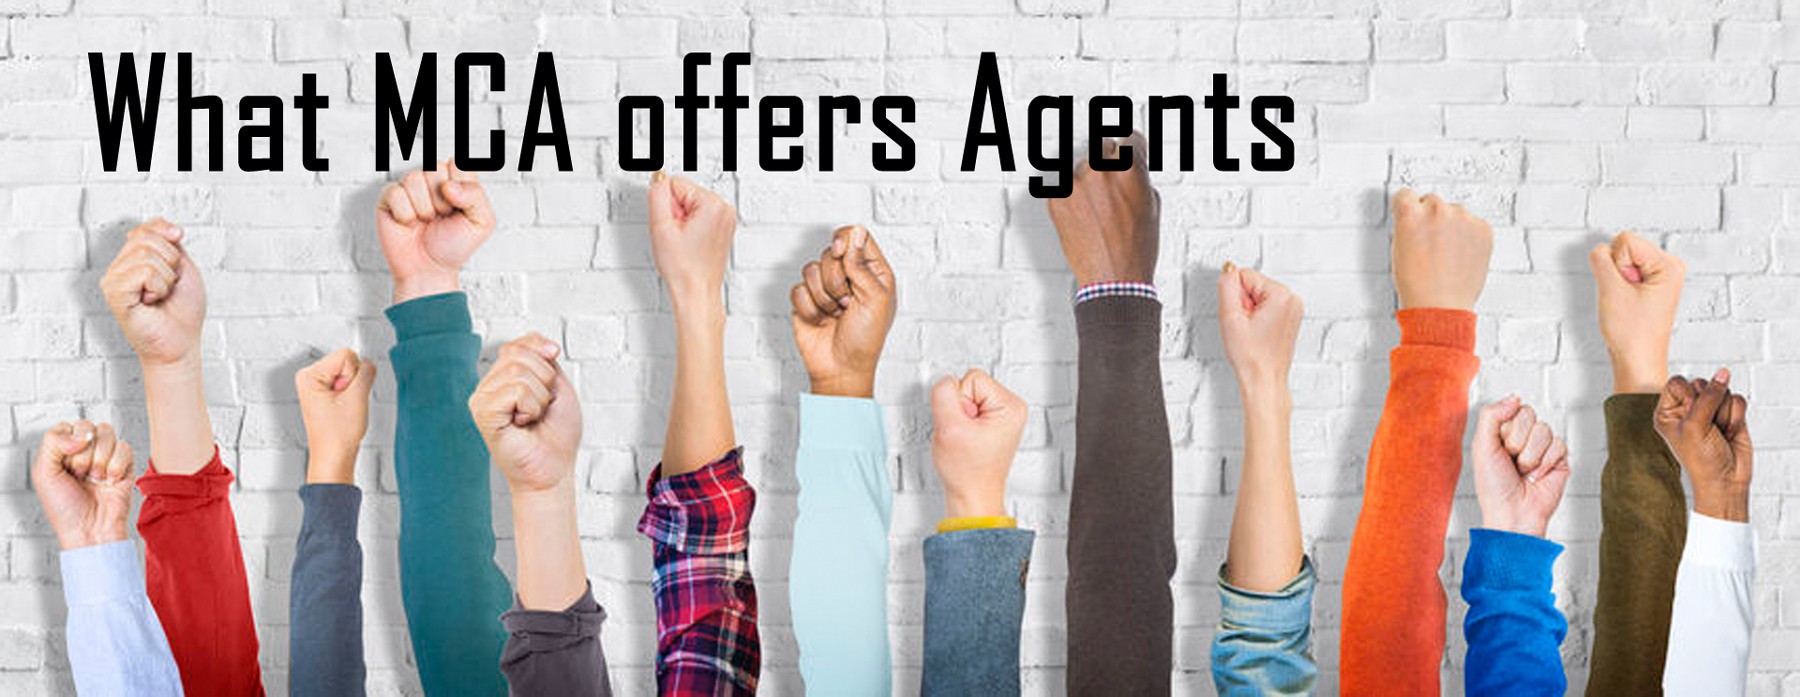 What MCA offers agents